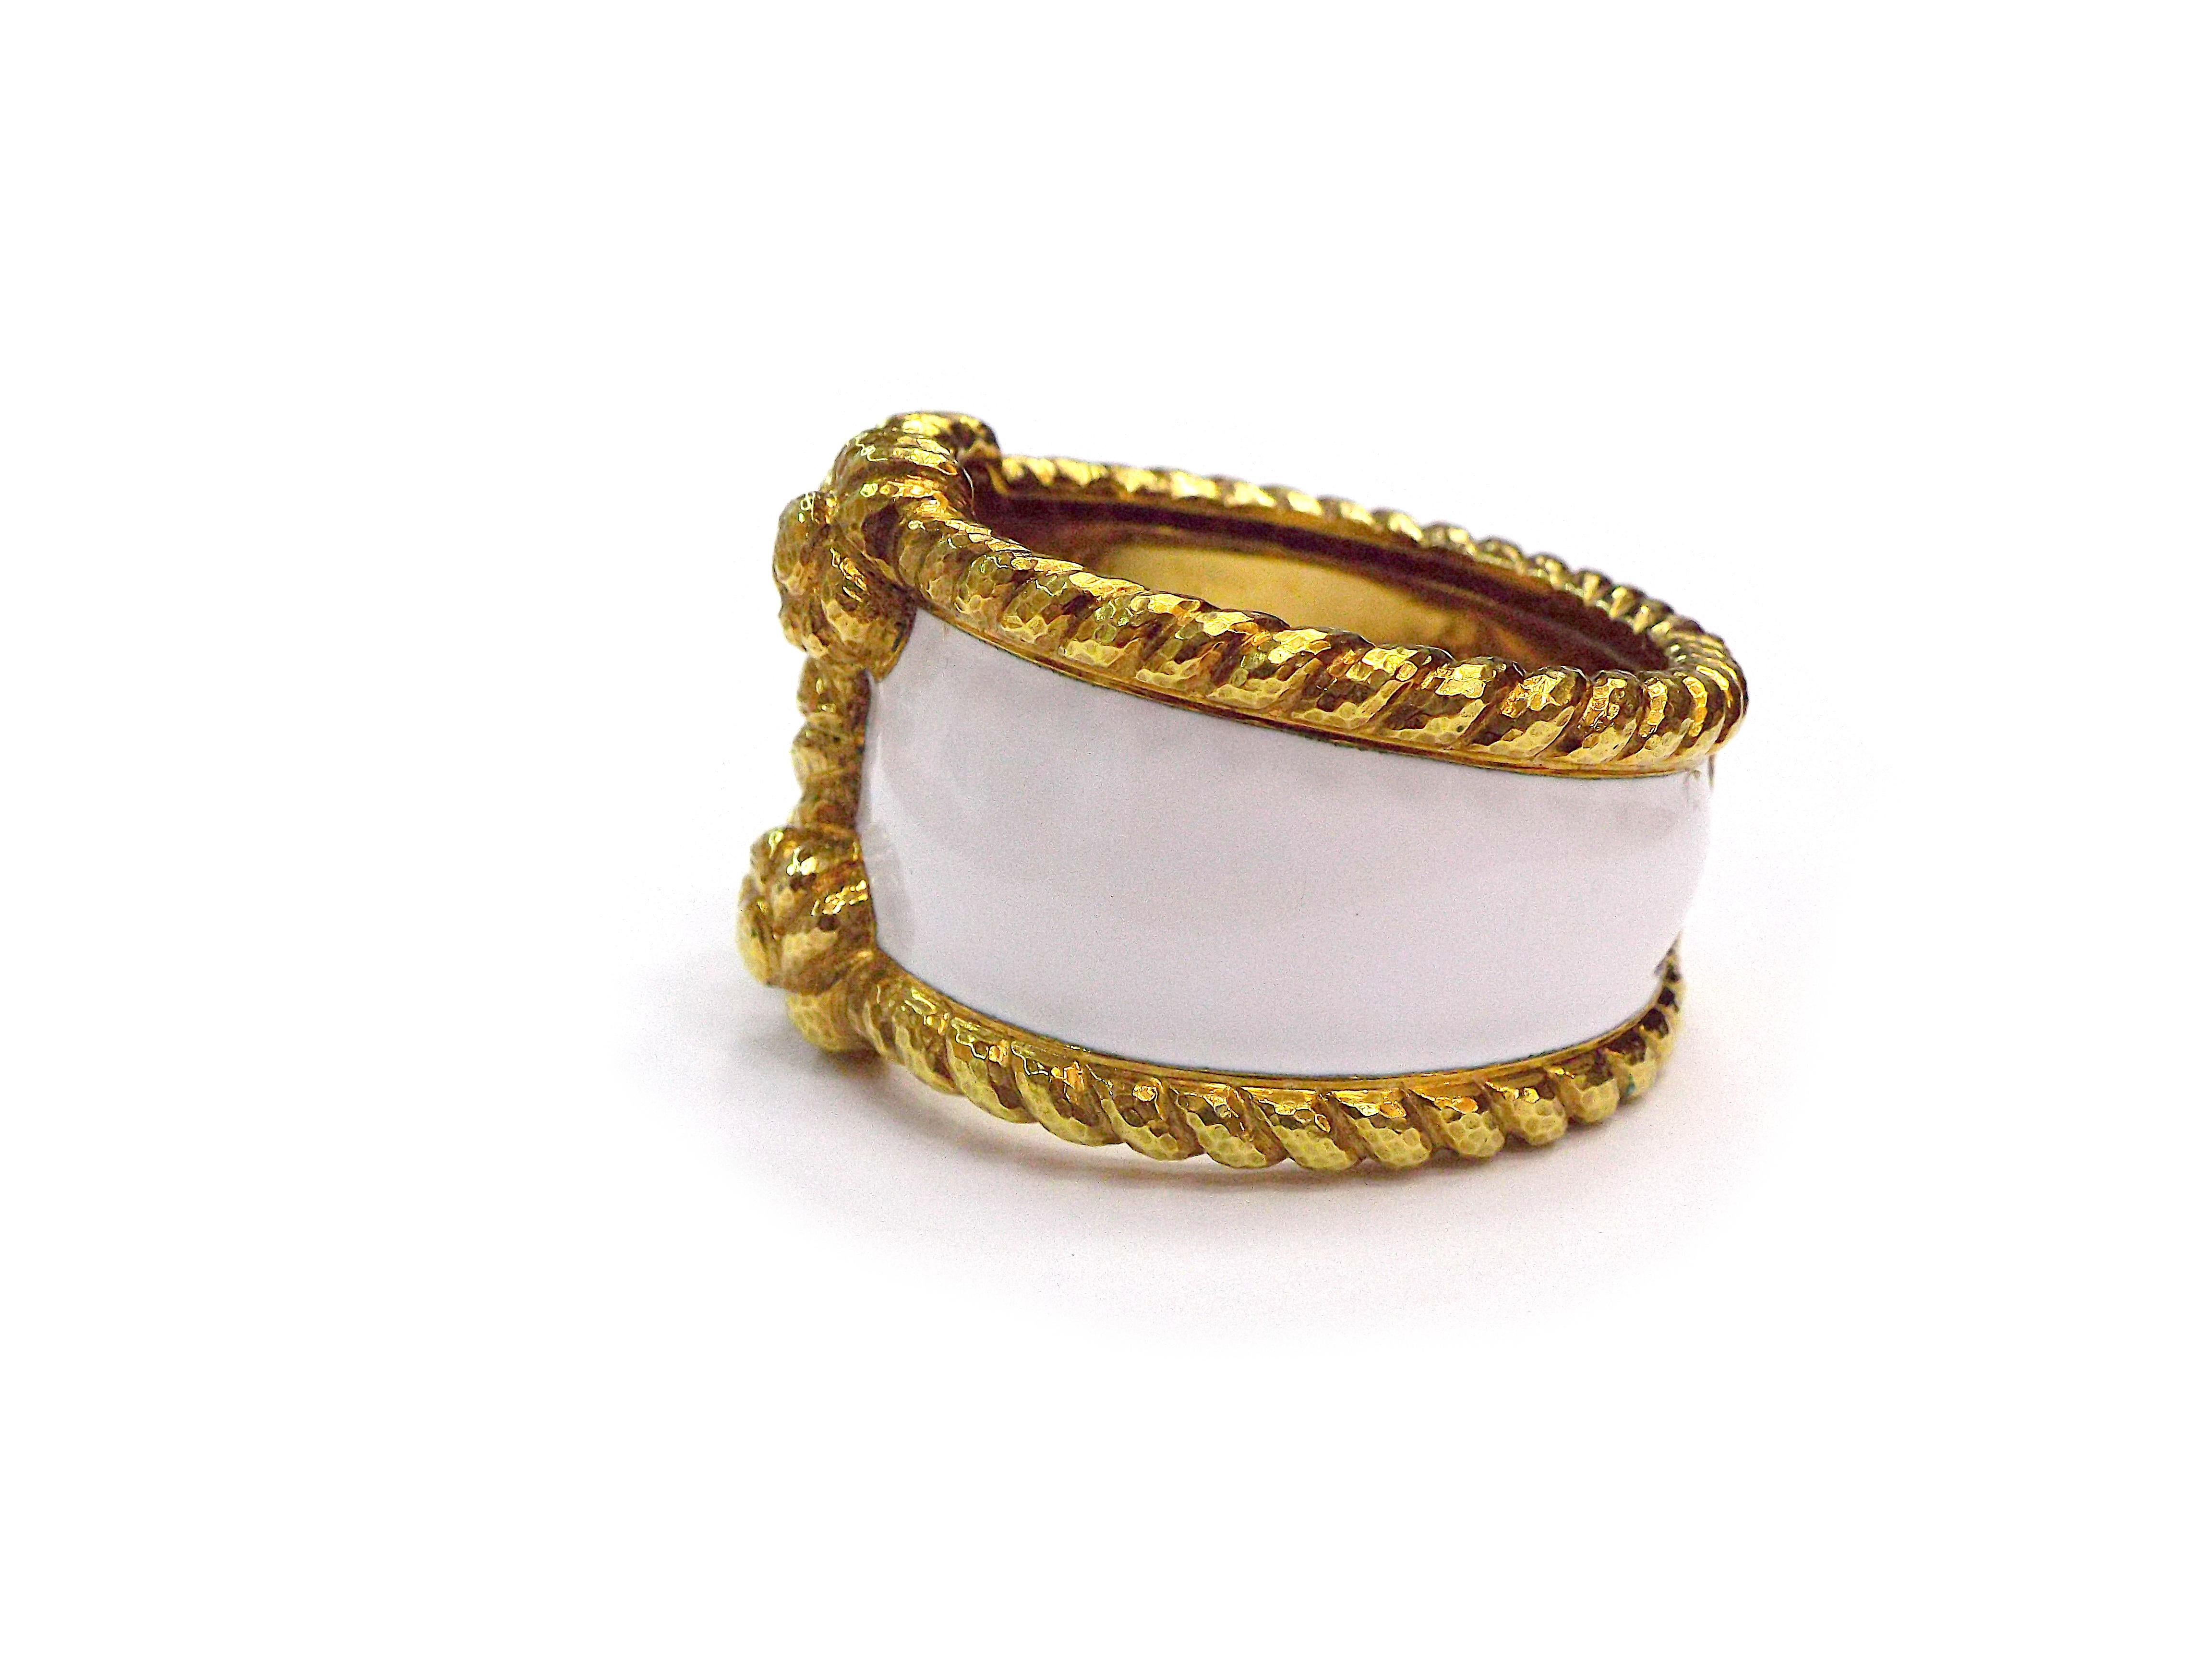 A chic bracelet by David Webb performed in 18K yellow gold and white enamel. Inner circumference is approx. 6.5 inches, weight is approx. 1317 grams. Signed Webb, marked 18K.